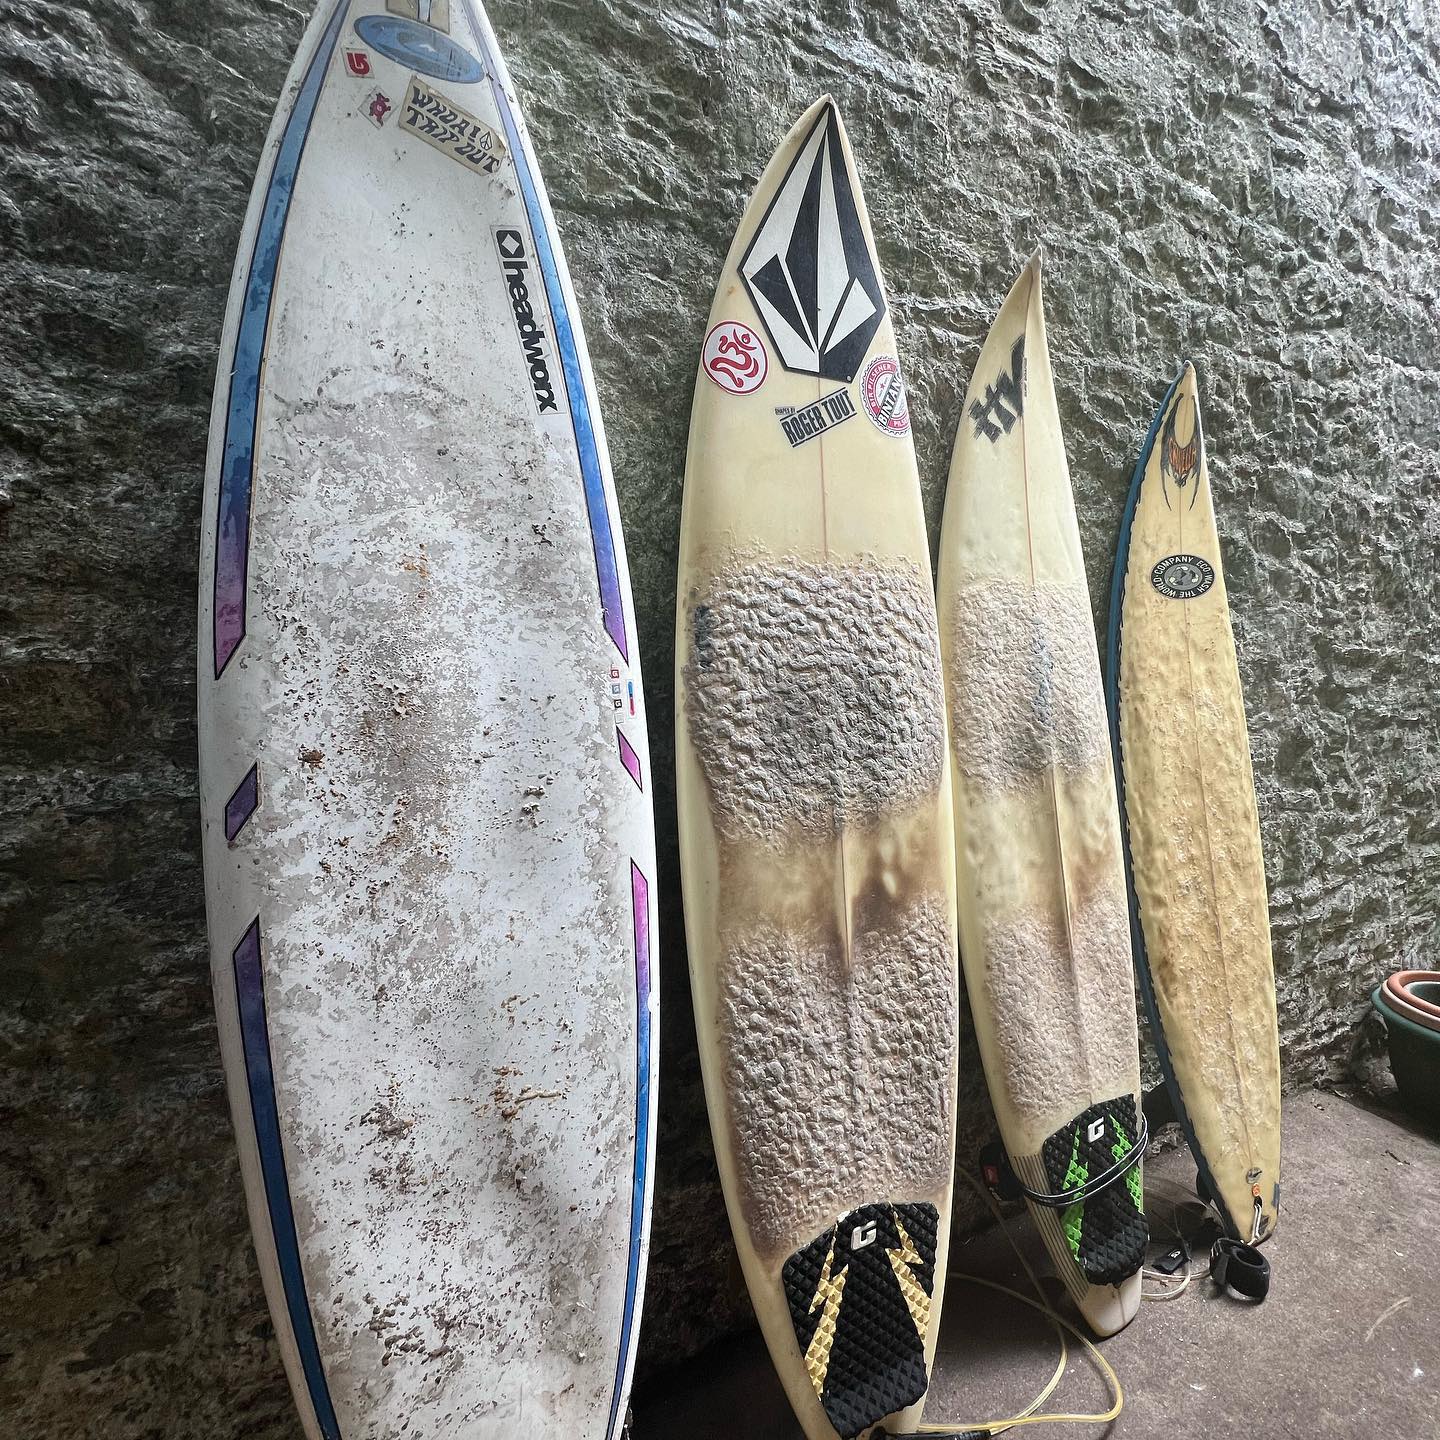 Need to get out and use one of these very soon. They’ve all seen better days (just like the owner) and I ideally need to offload a couple of them. Bic pop-out on left  is so unsinkable I could paddleboard with it, I don’t have a paddle to try the theory tho. 2nd from left is my Roger Tout 6’10” custom that I had shaped for a trip to Bali. Next is another custom by Hooded Villain, 6’6” and my fave board when I’m fit! 
The last on far right, was Hayden’s board that was gifted by a surfing friend. It’s 6’3” custom and I’d like to pass it on to anyone looking for a board for their kids. Its still usable although I’ve not personally tried it. If you’re near Torquay, Devon and want to take a look at it, DM me. :)
#surfing #surfinglife #n+1 #surfboards #rogertoutsurfboards